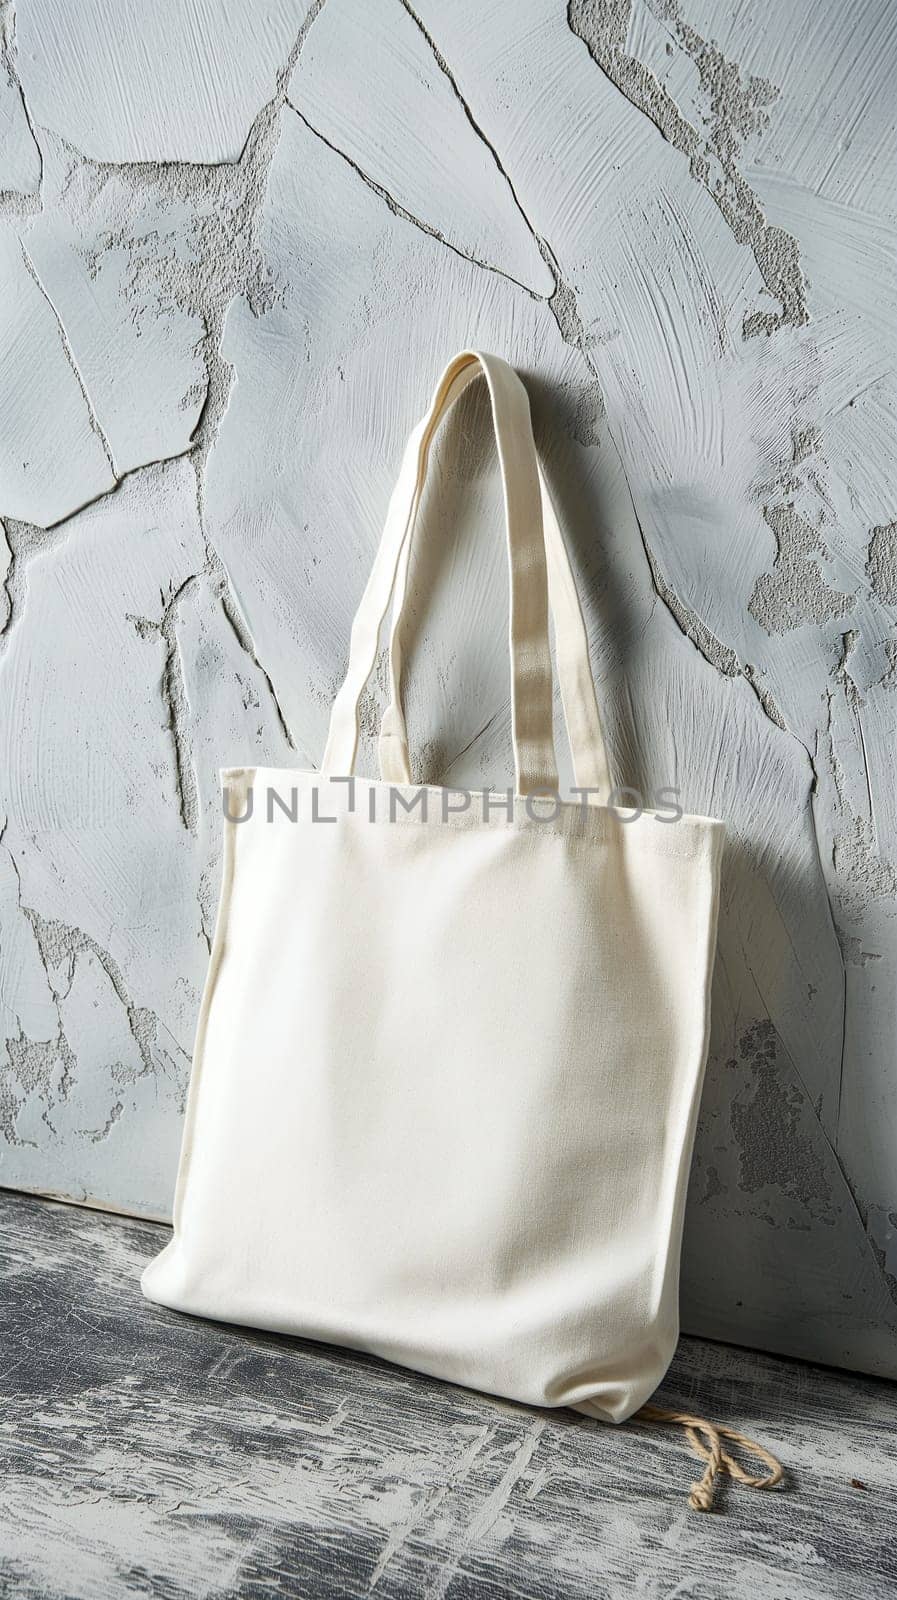 Blank canvas tote bag on rustic wooden background by chrisroll